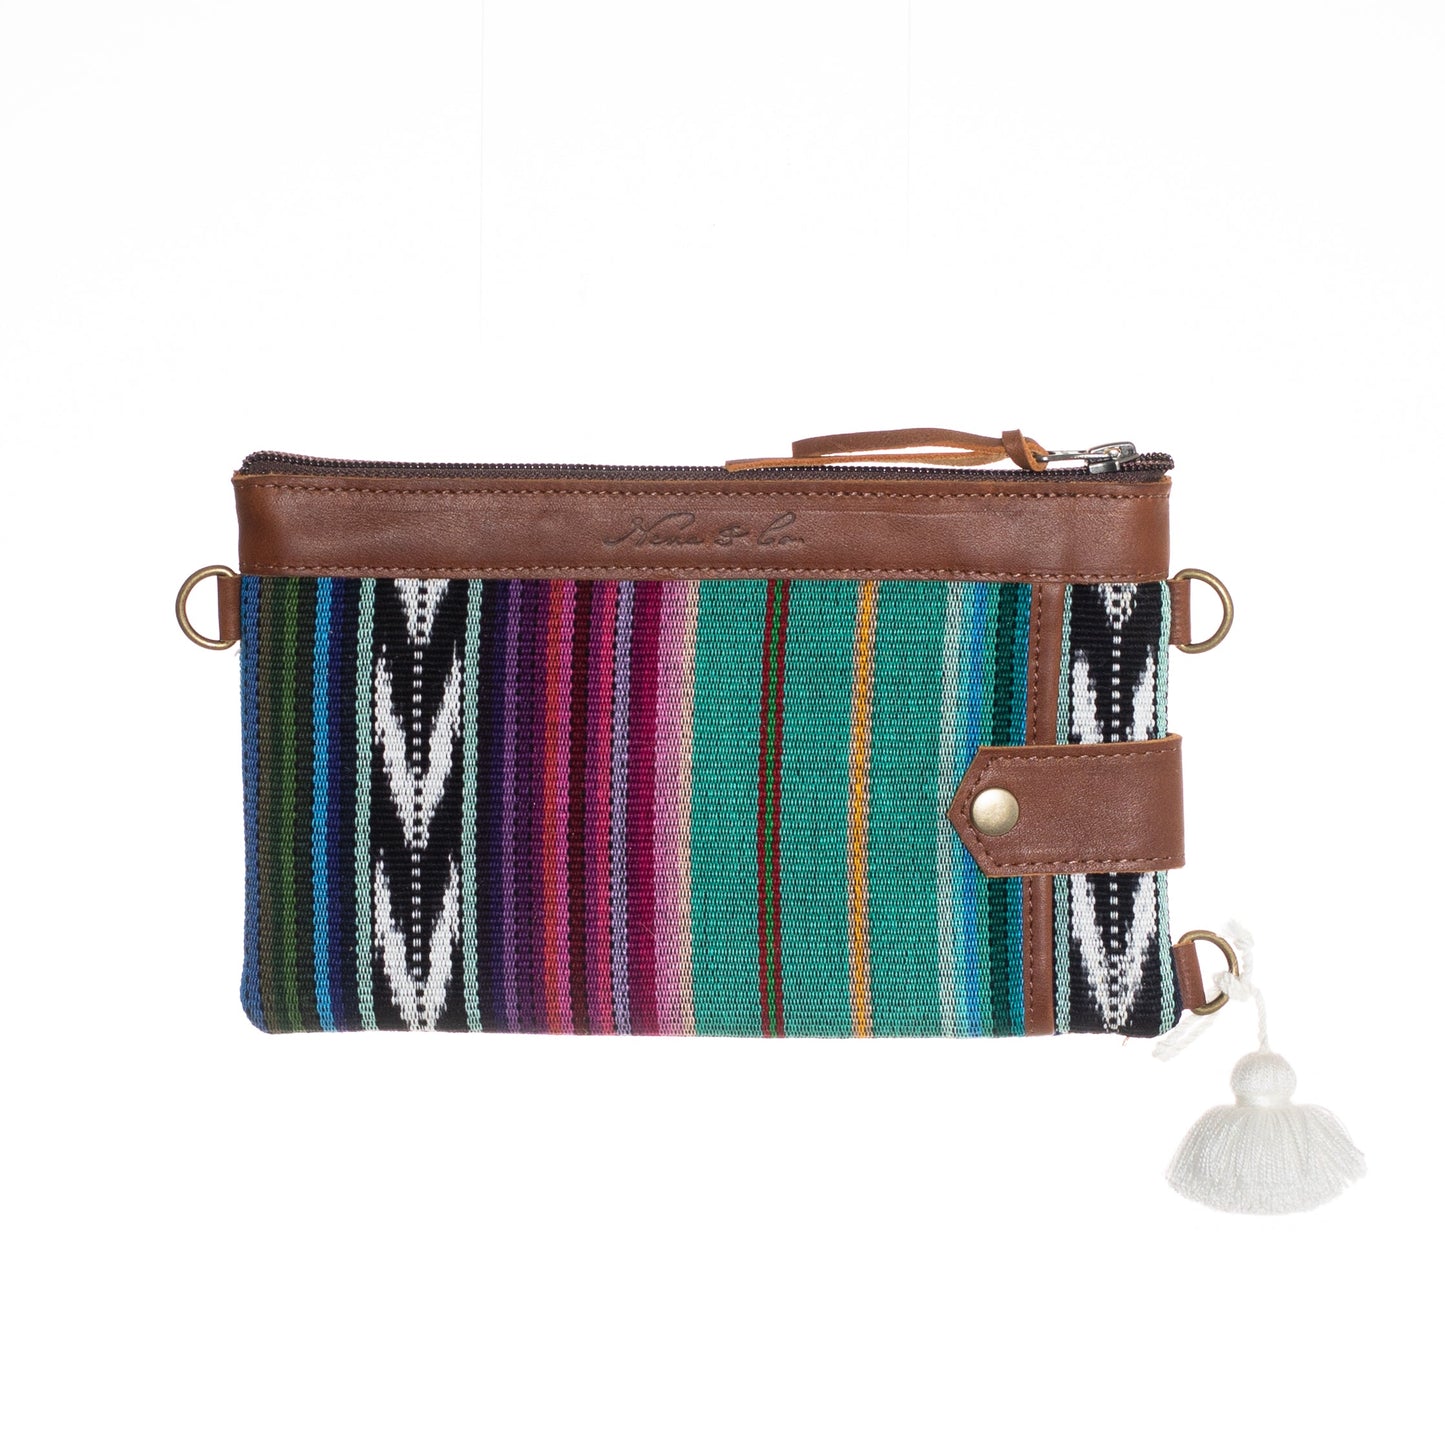 EVERYTHING CLUTCH WITH 3 D-RINGS - BAJA - CAFE LEATHER